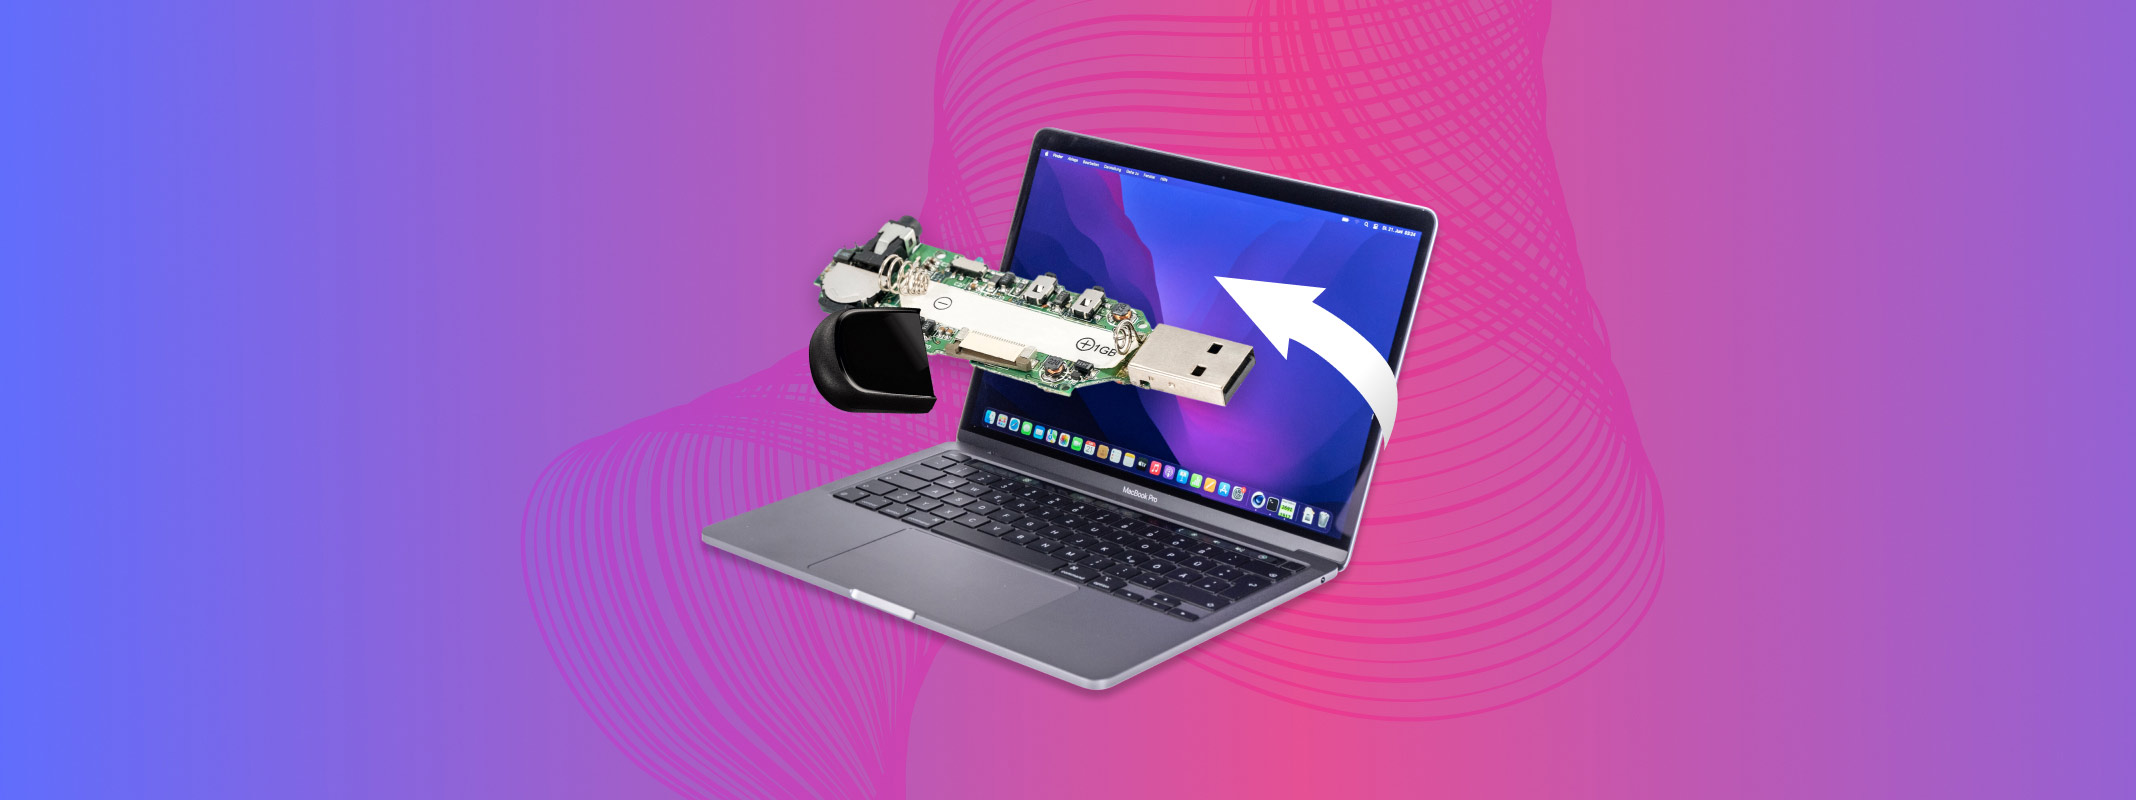 How to Fix Corrupted USB Drive on and Recover Data from It